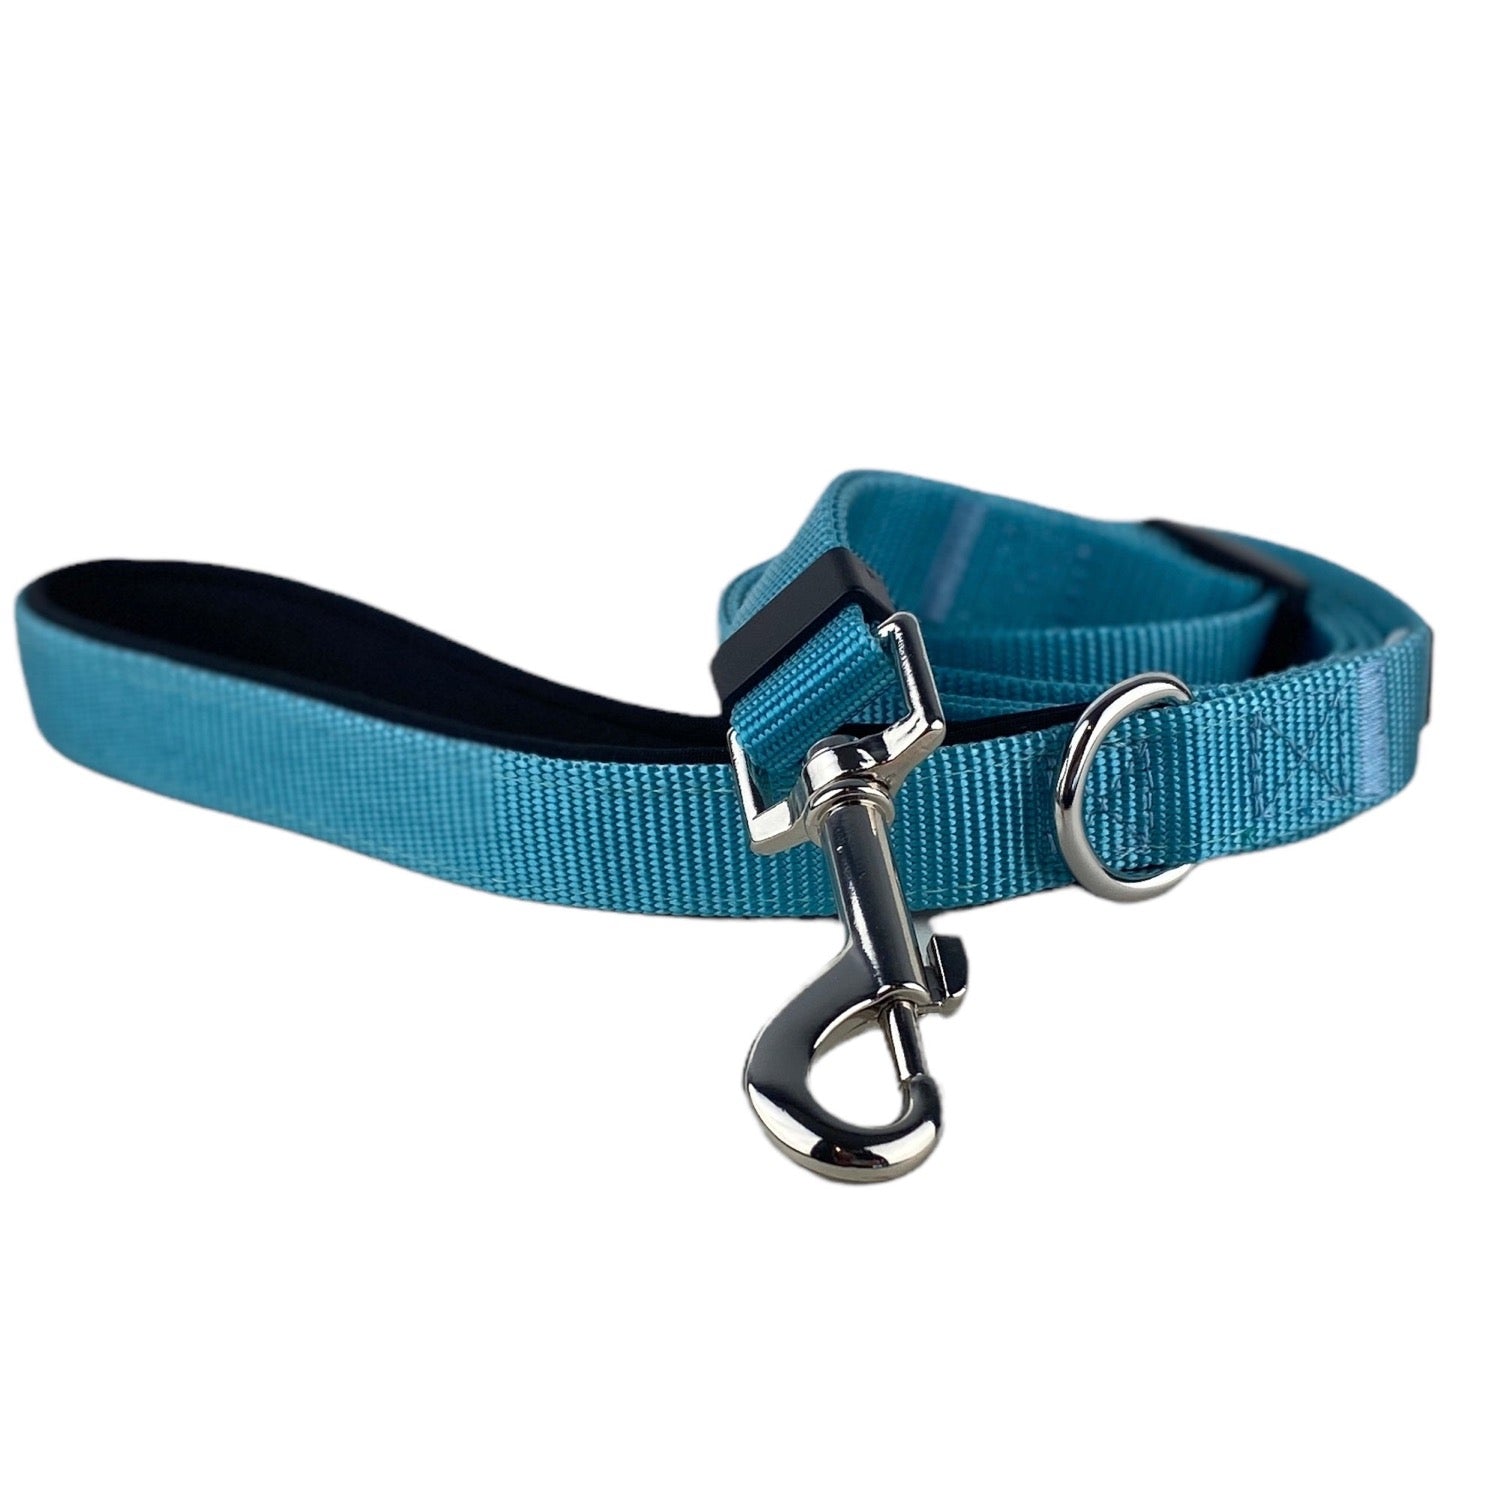 a photo of a teal blue padded handle adjustable leash from fearless pet on a white background